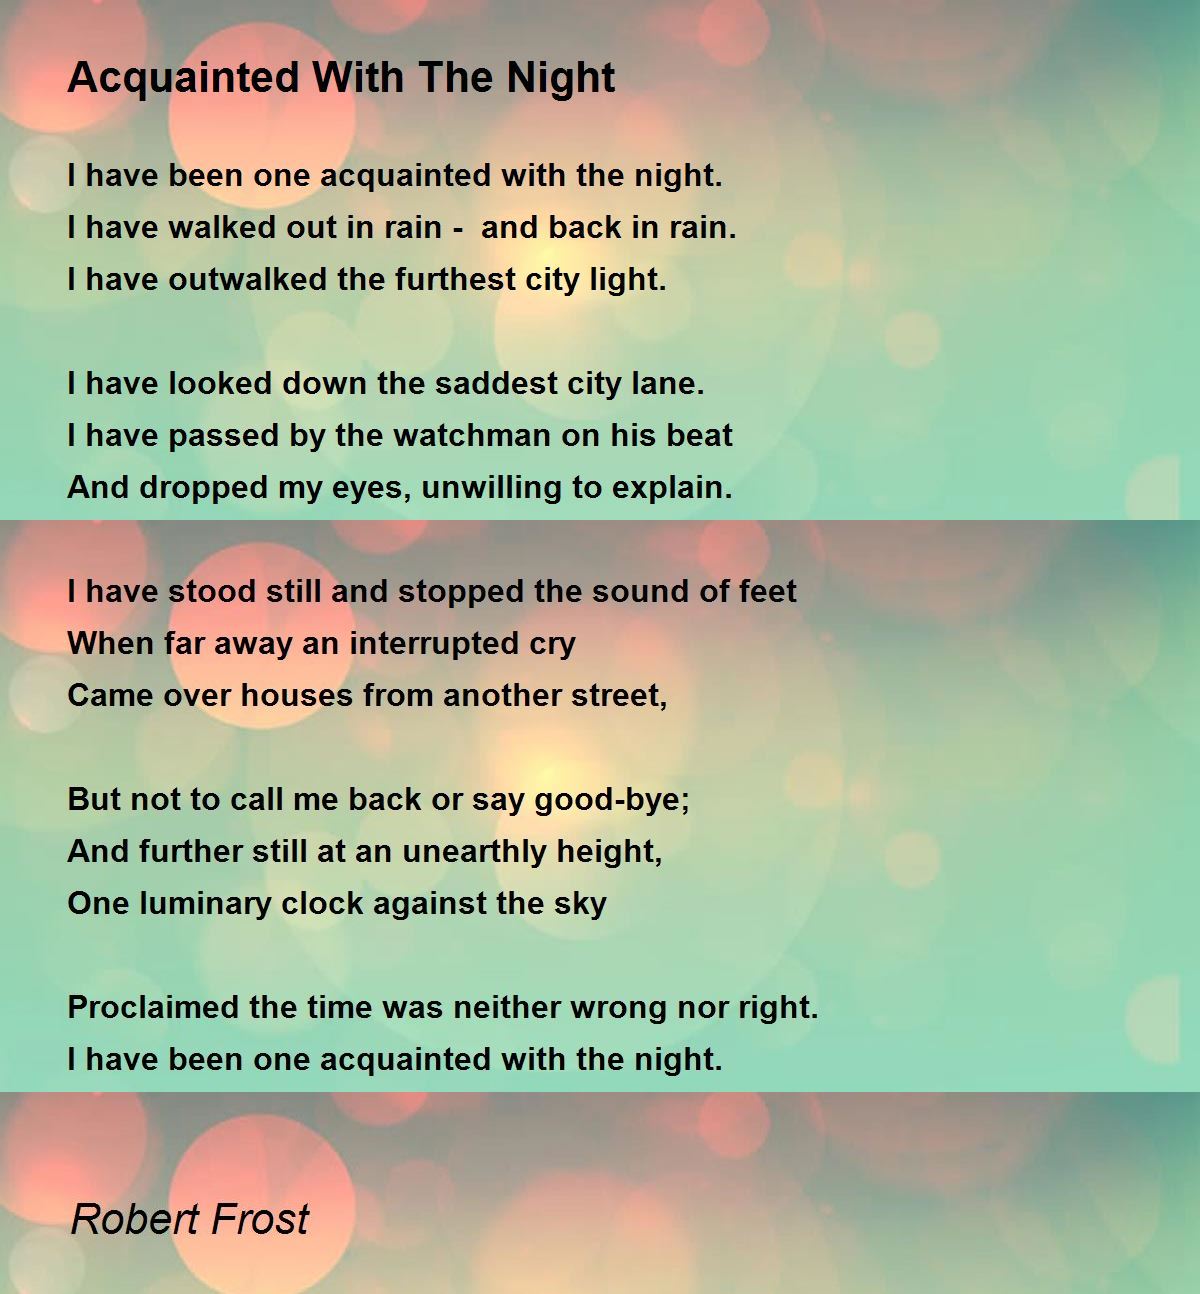 Acquainted with the night by robert